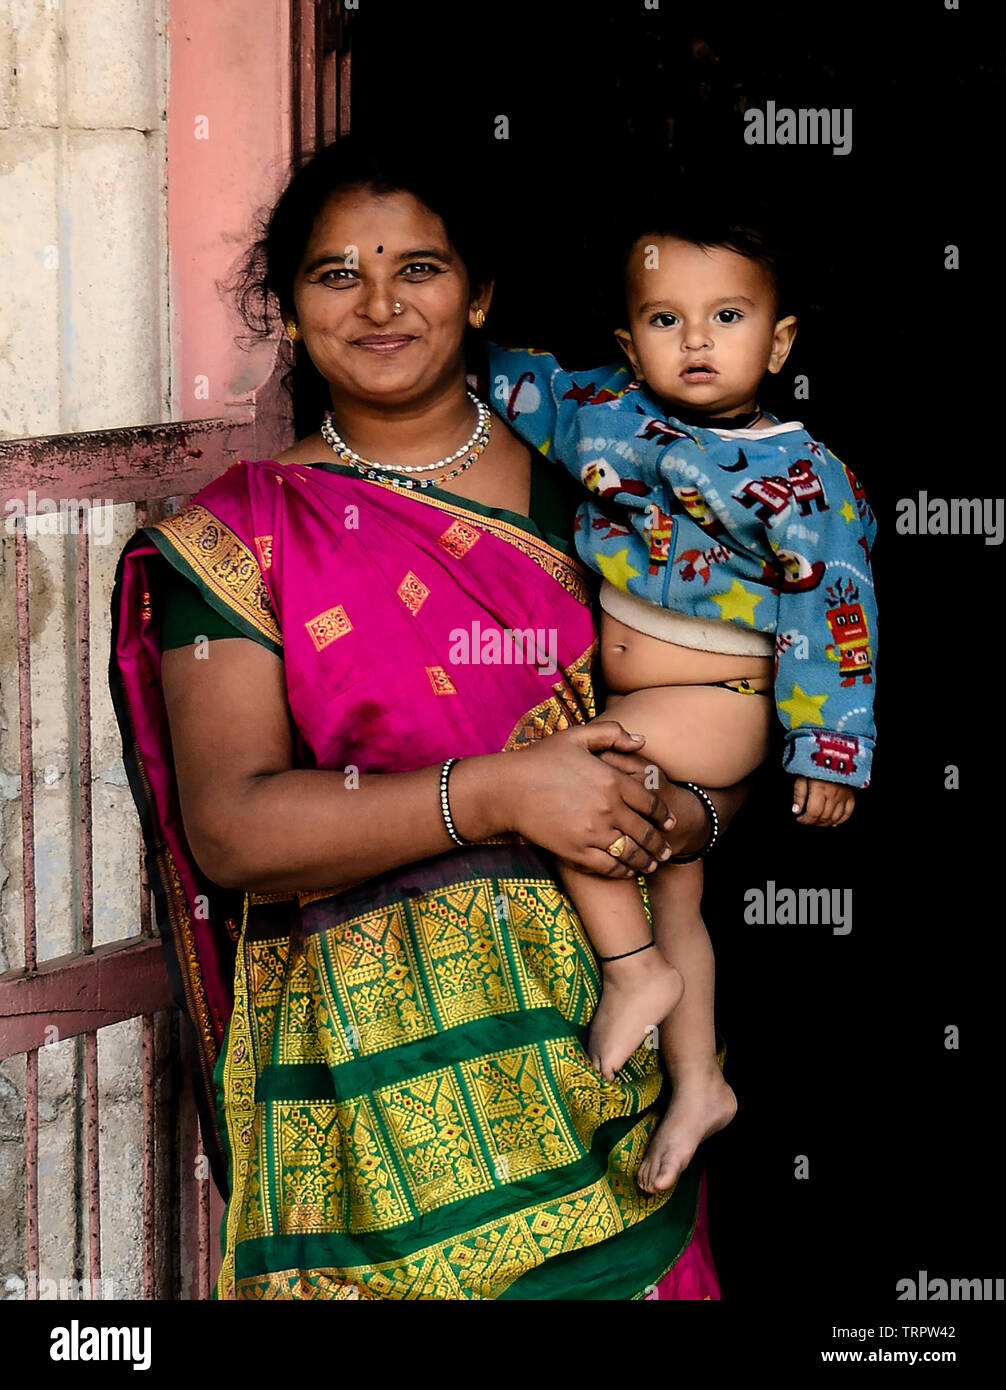 Indian Mother Stock Photos & Indian Mother Stock Images - Alamy